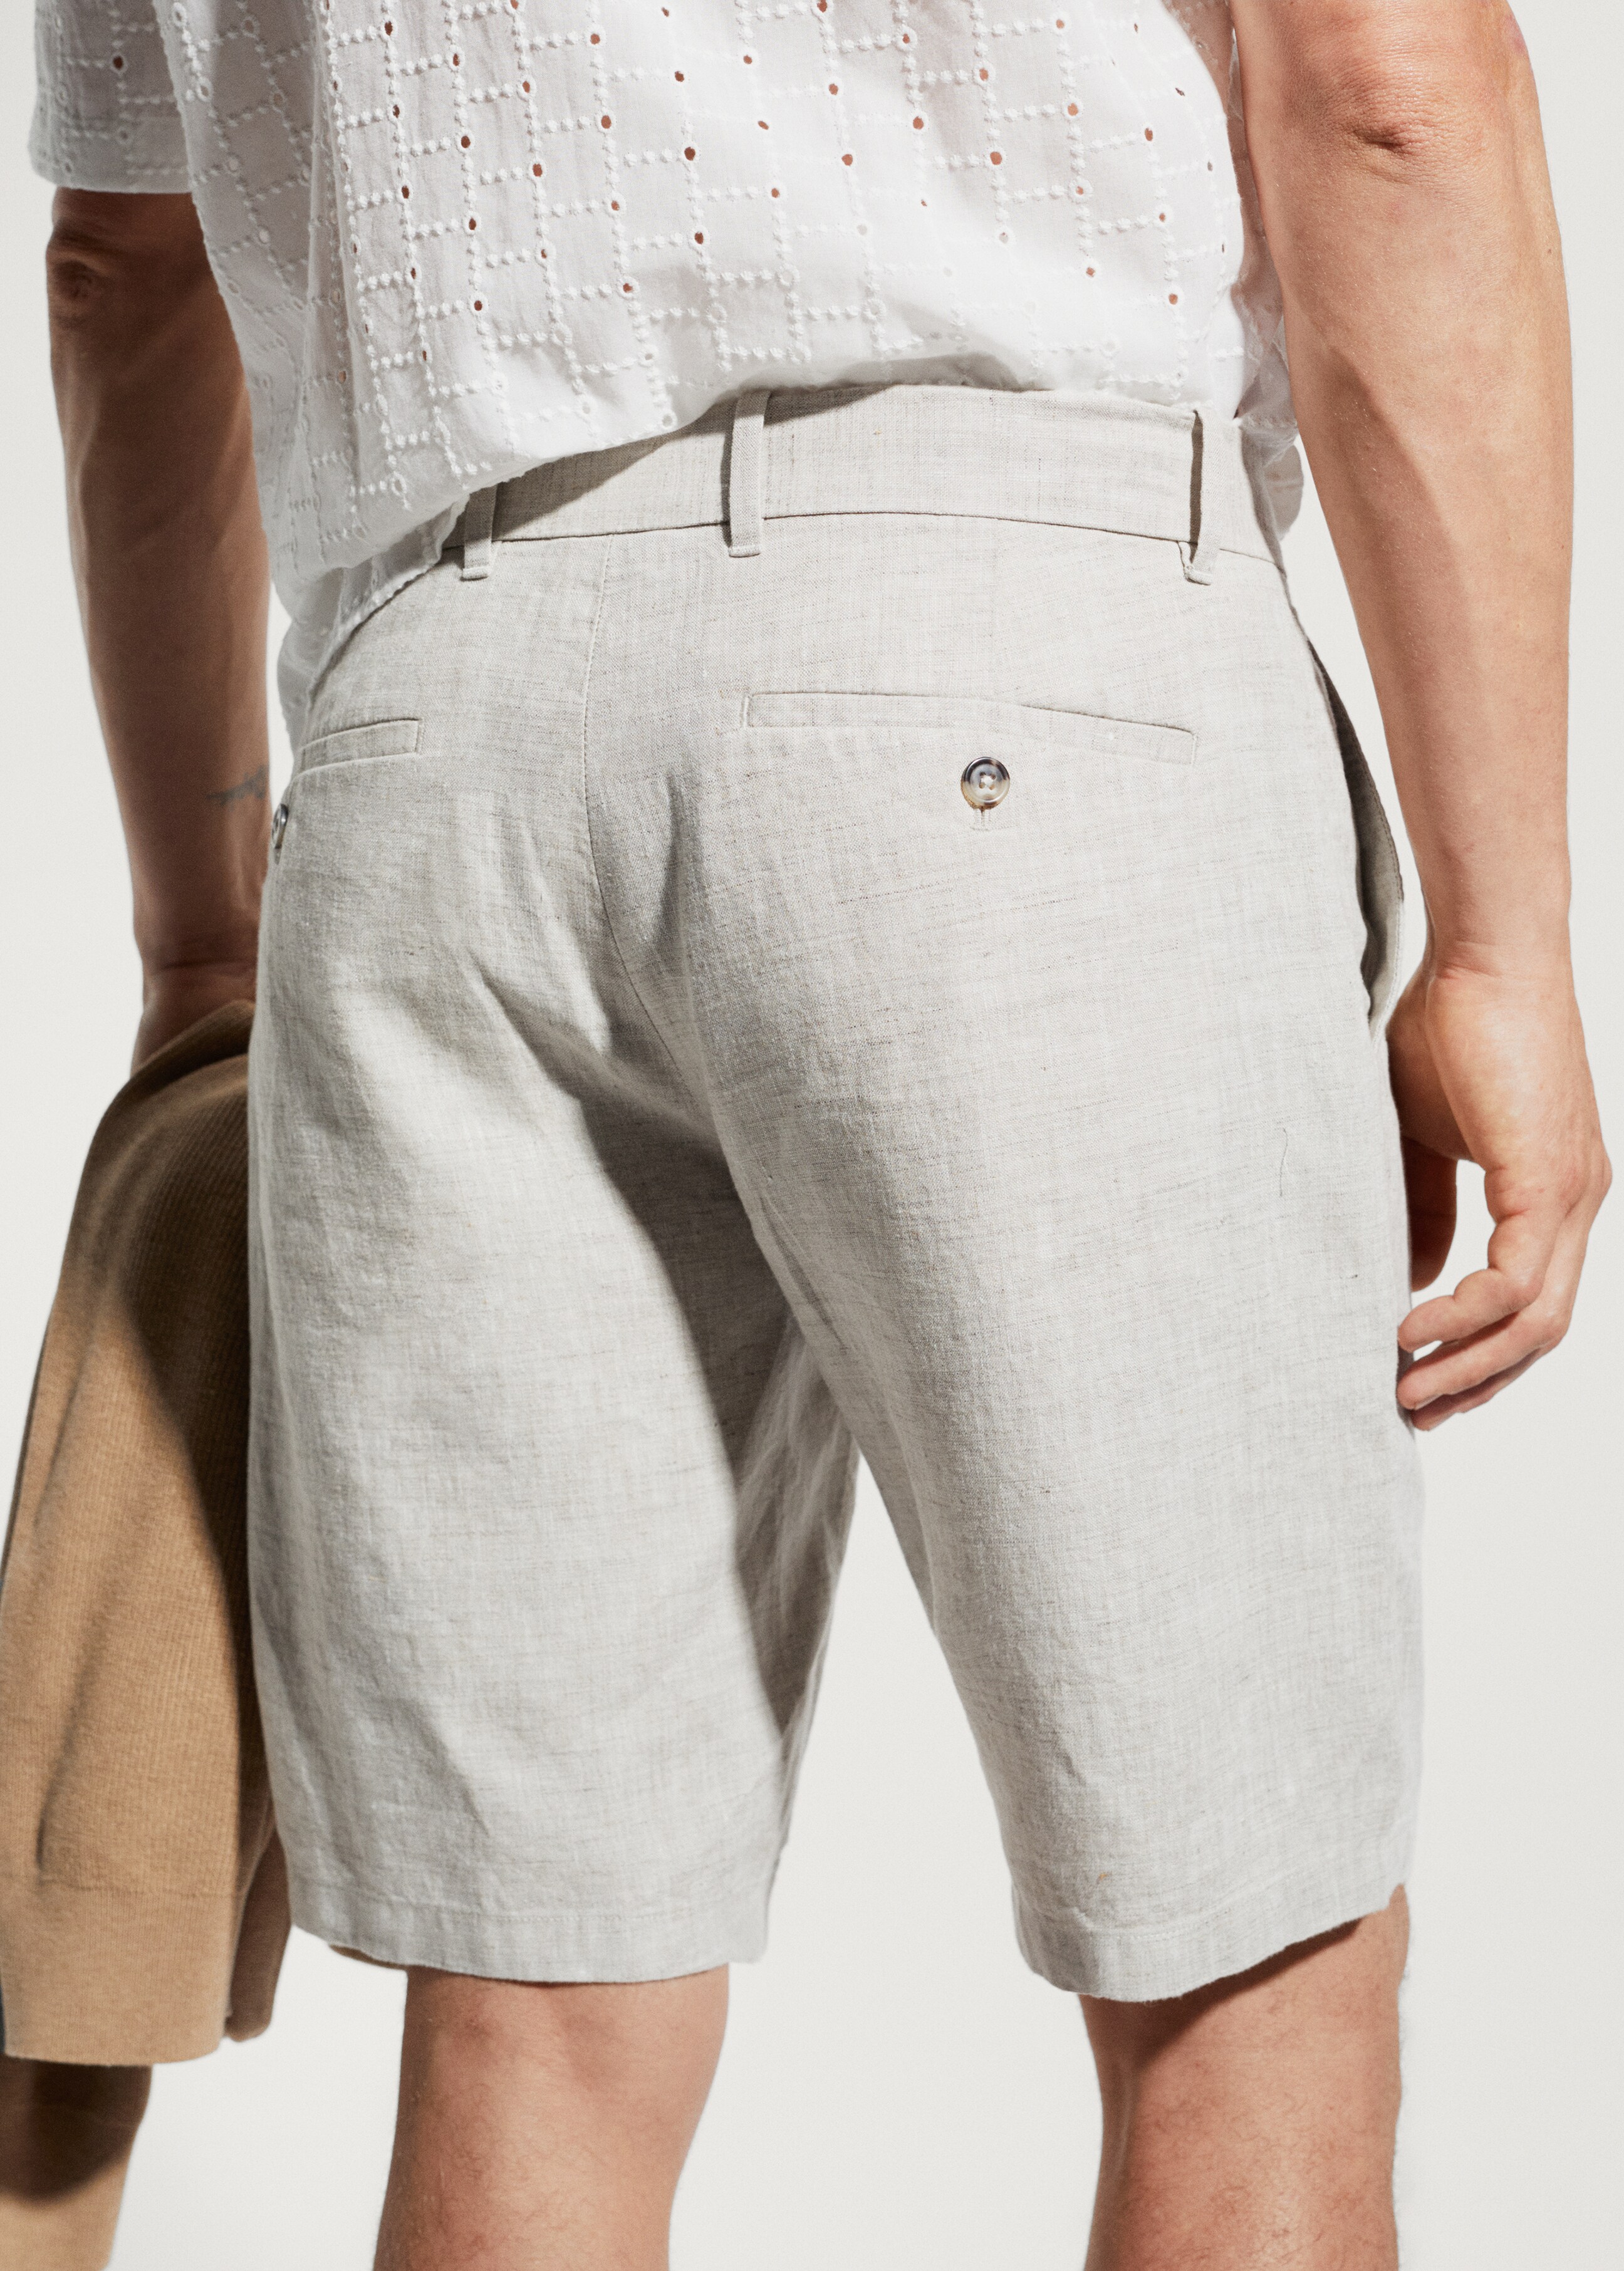 100% linen shorts - Details of the article 6